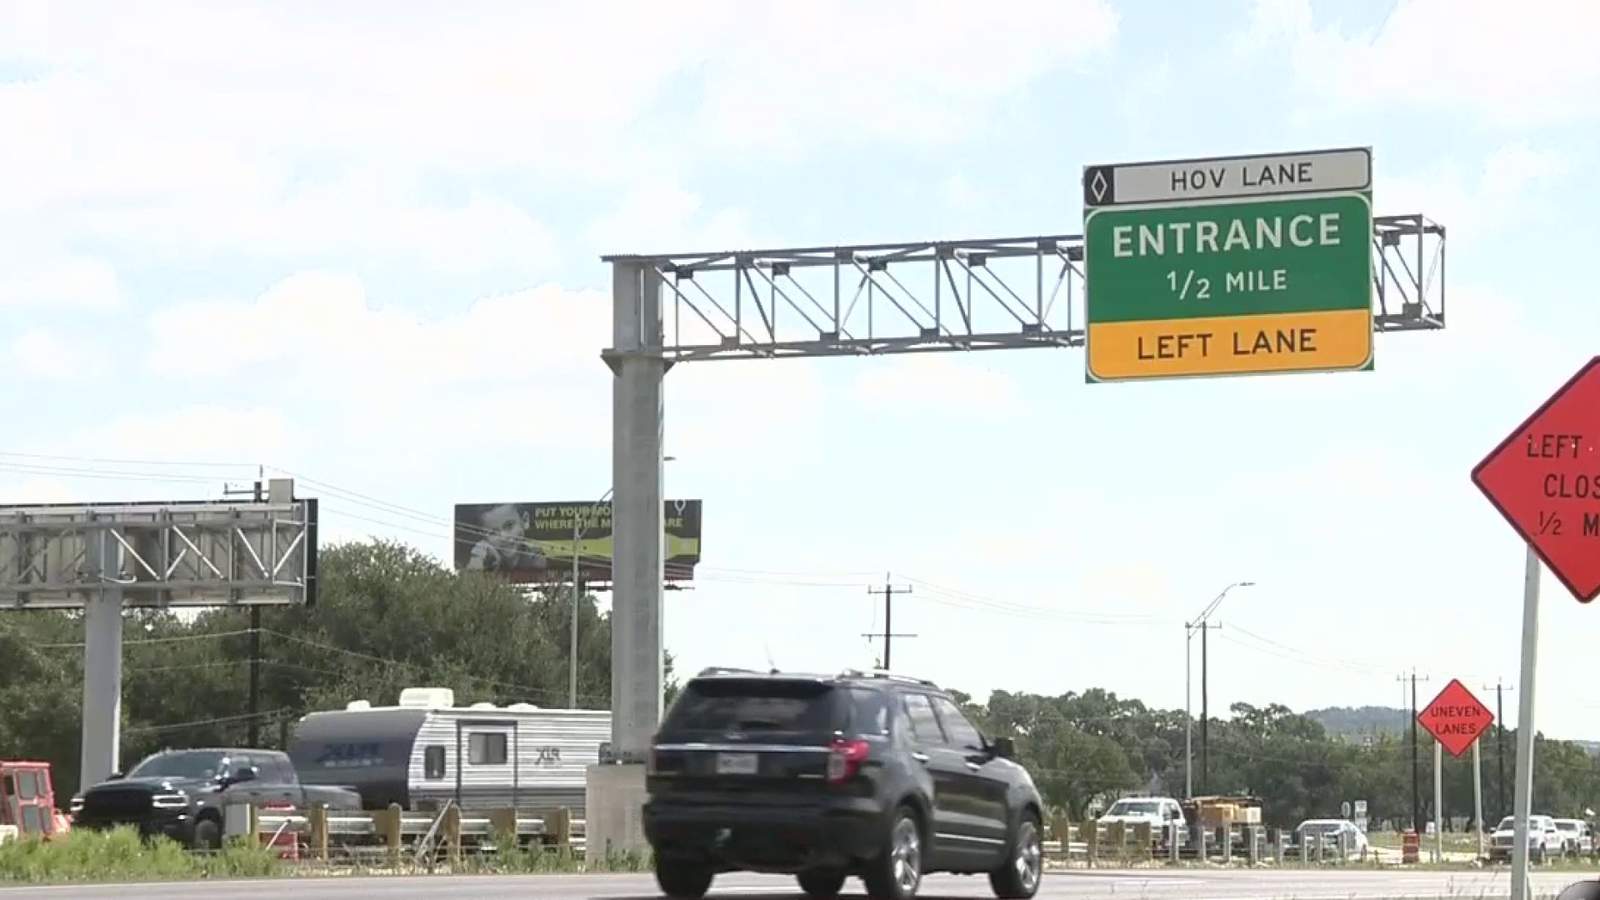 Bexar County’s 2nd HOV lane now open